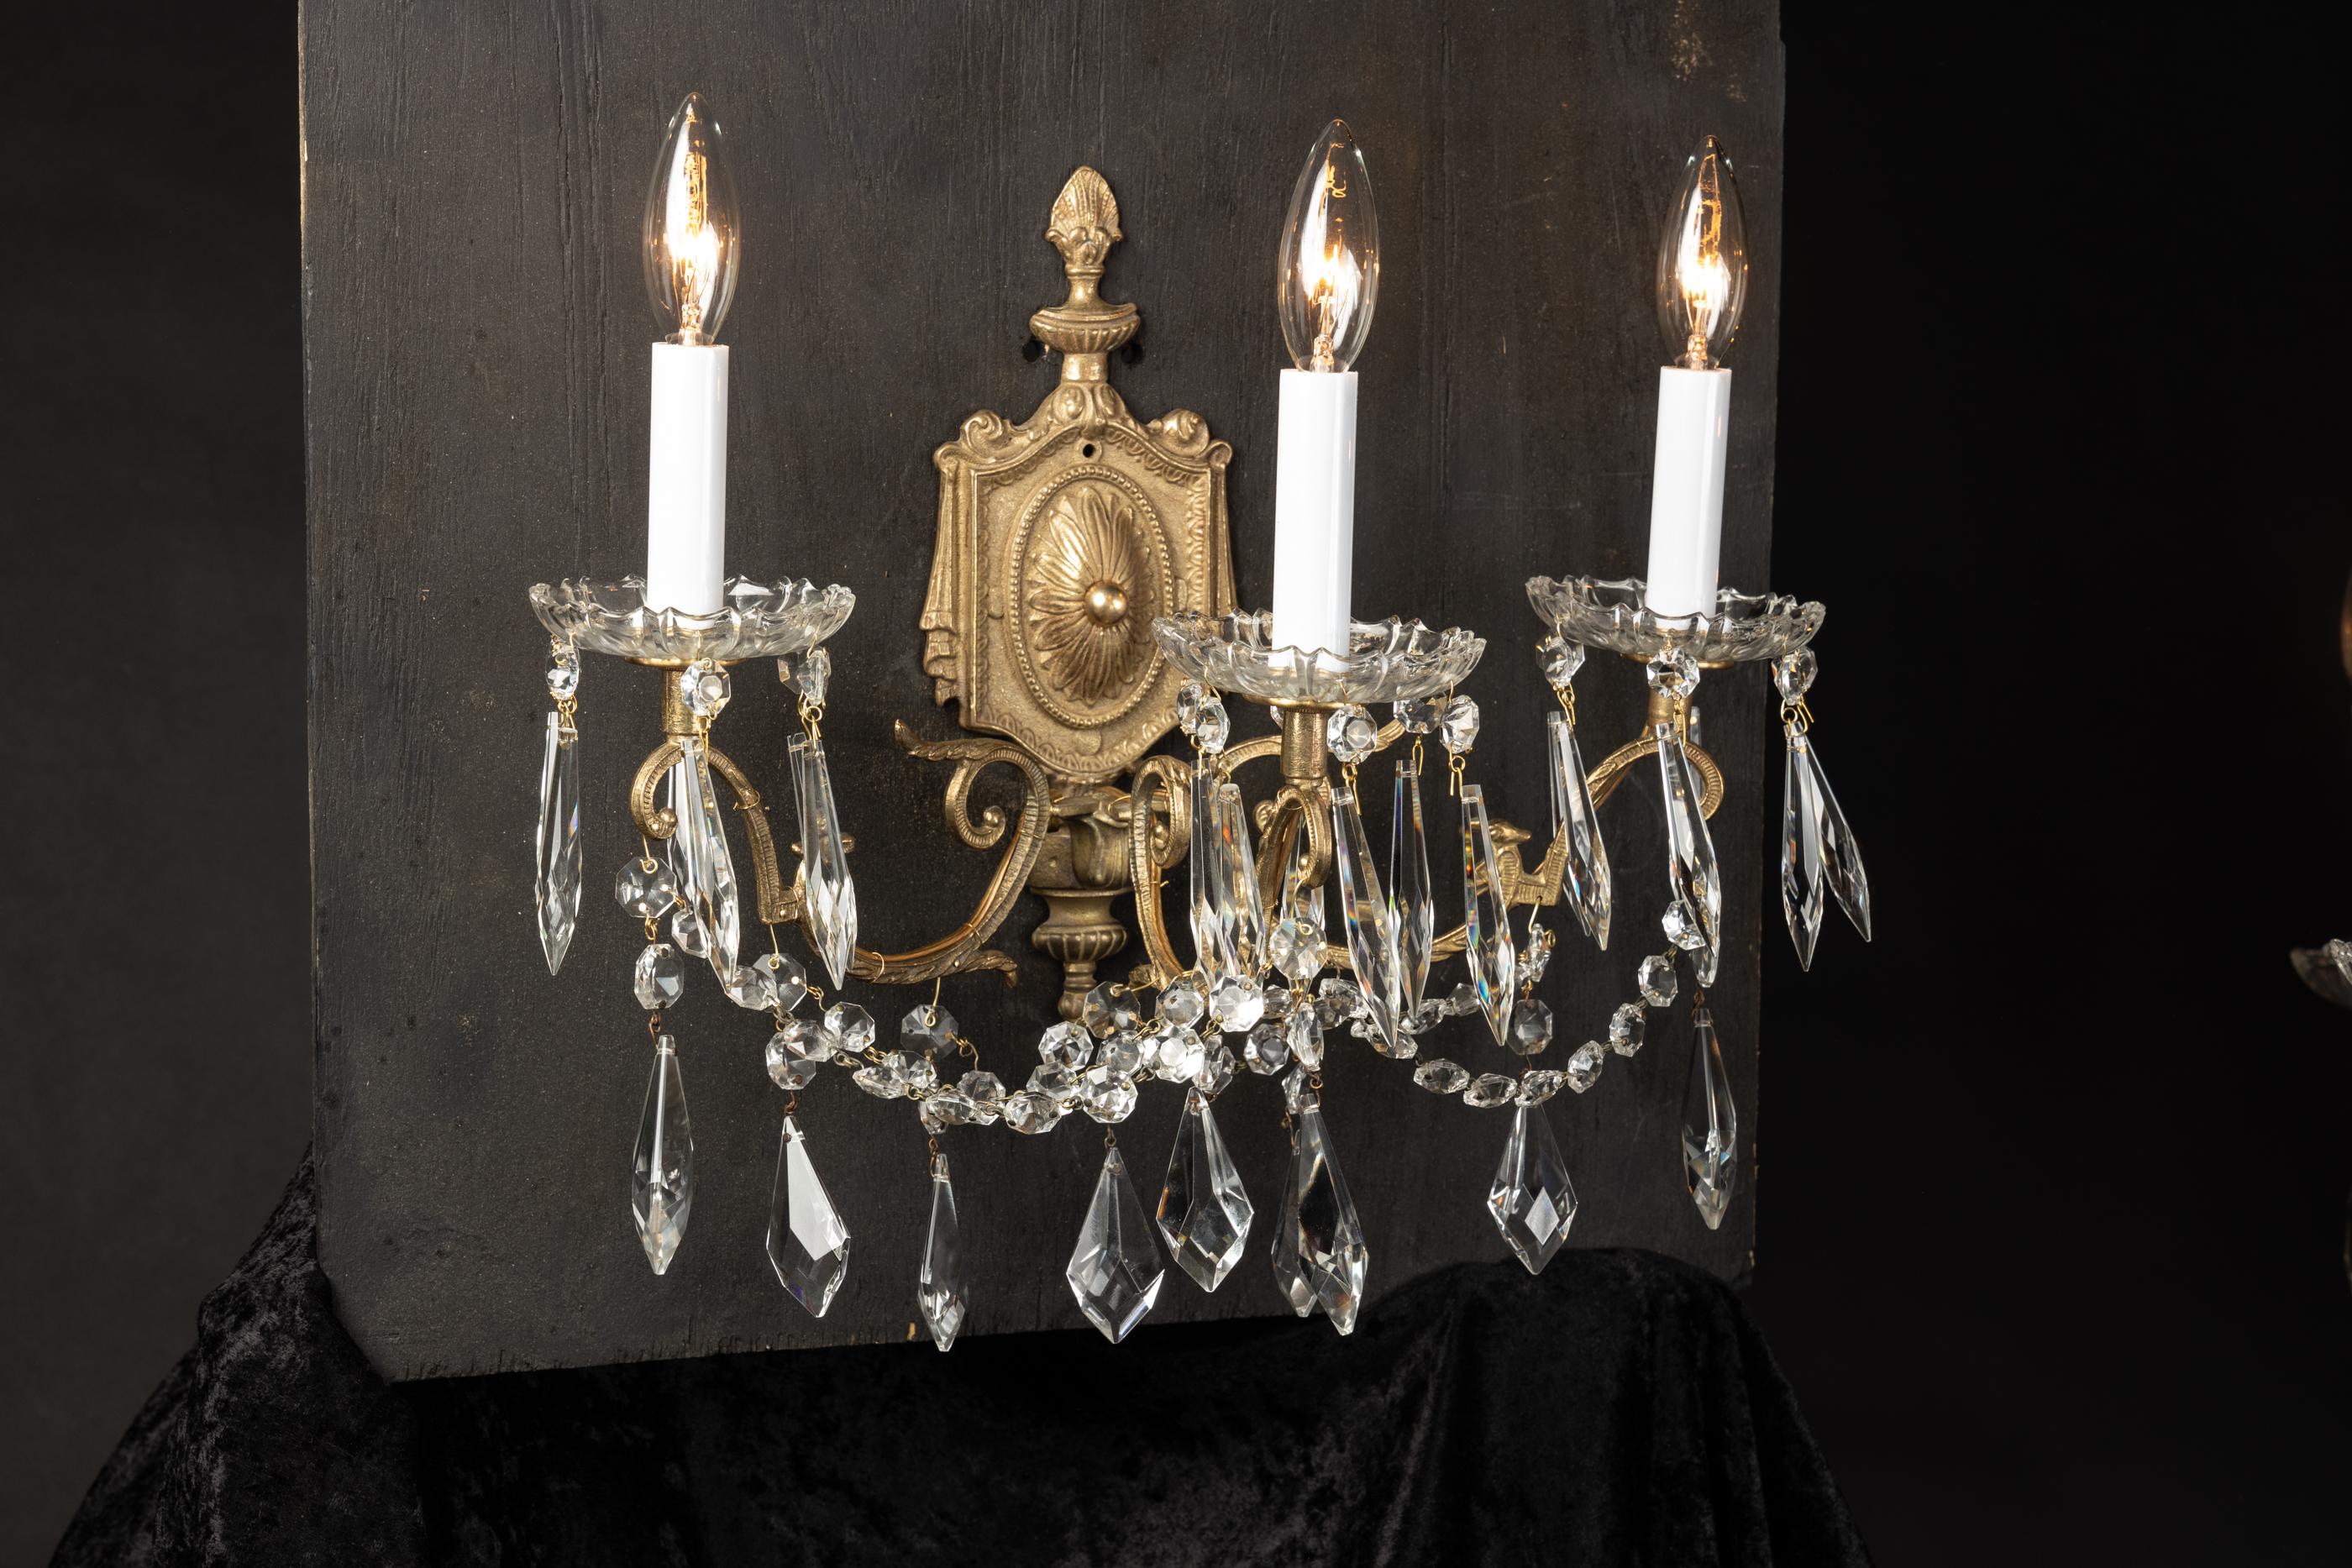 This beautiful pair of Louis XVI style French antique sconces feature three arms each as well as crystal bobeches. The pair dates back to the late 19th century. The arms are draped in octagonal crystal, crystal spears, and simple plaquettes. The